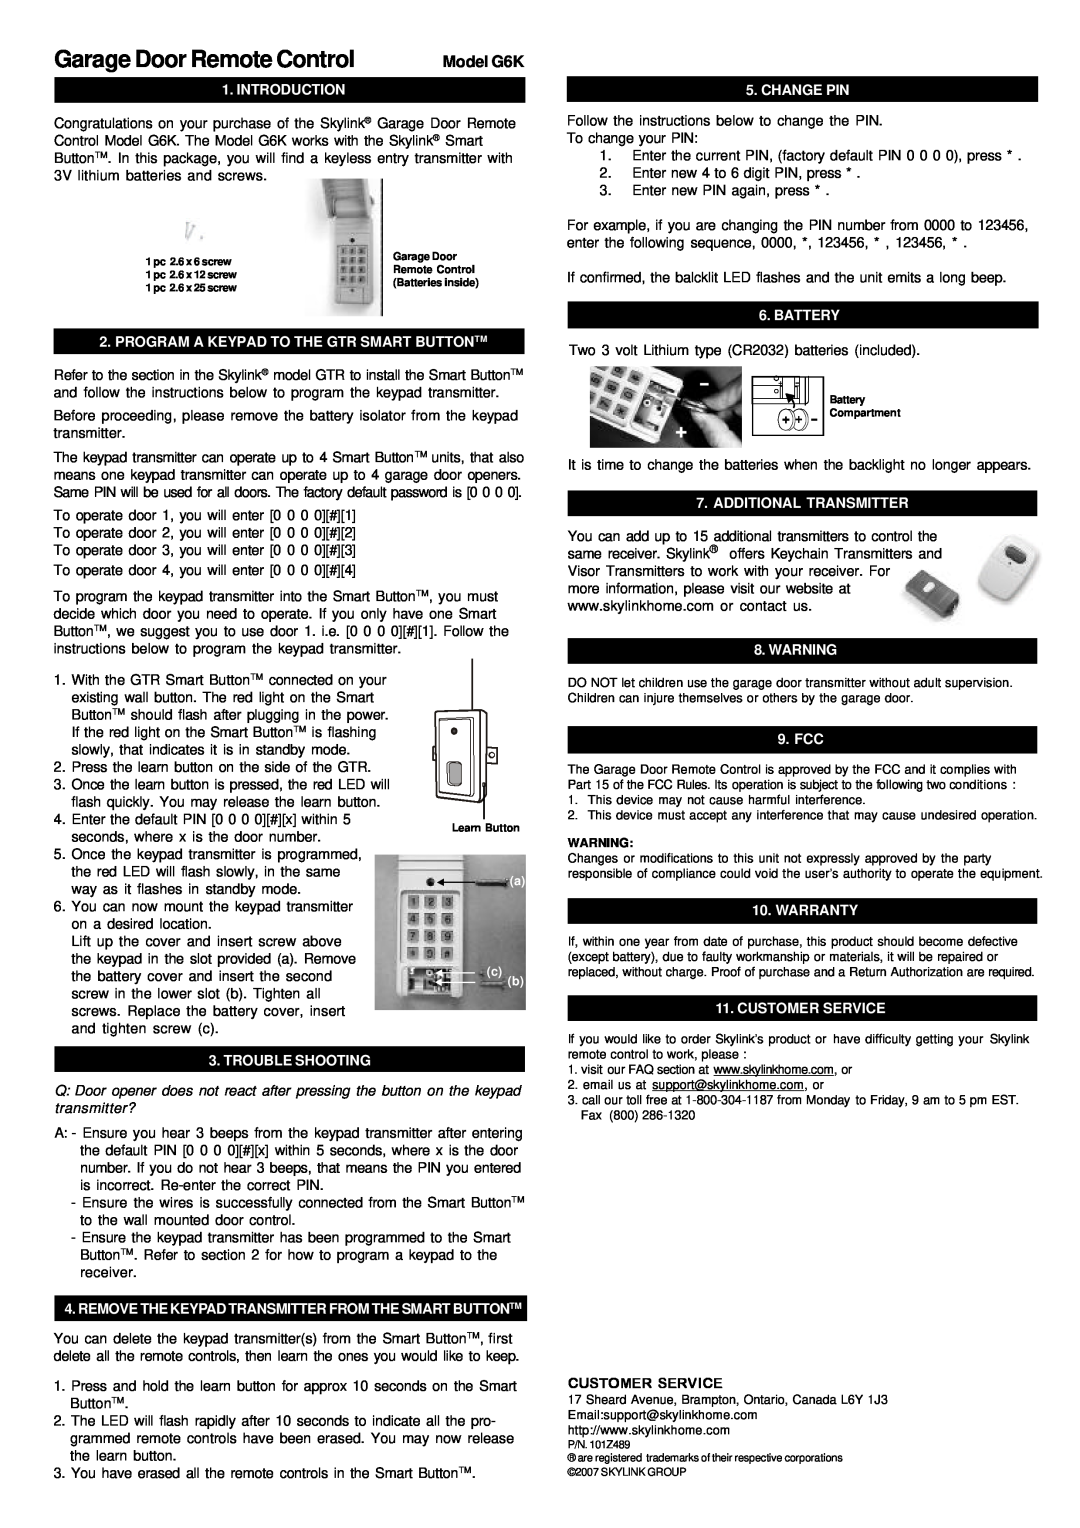 SkyLink G6K manual Introduction, Program A Keypad To A Garage Door Receiver, Installation, Trouble Shooting, Change Pin 